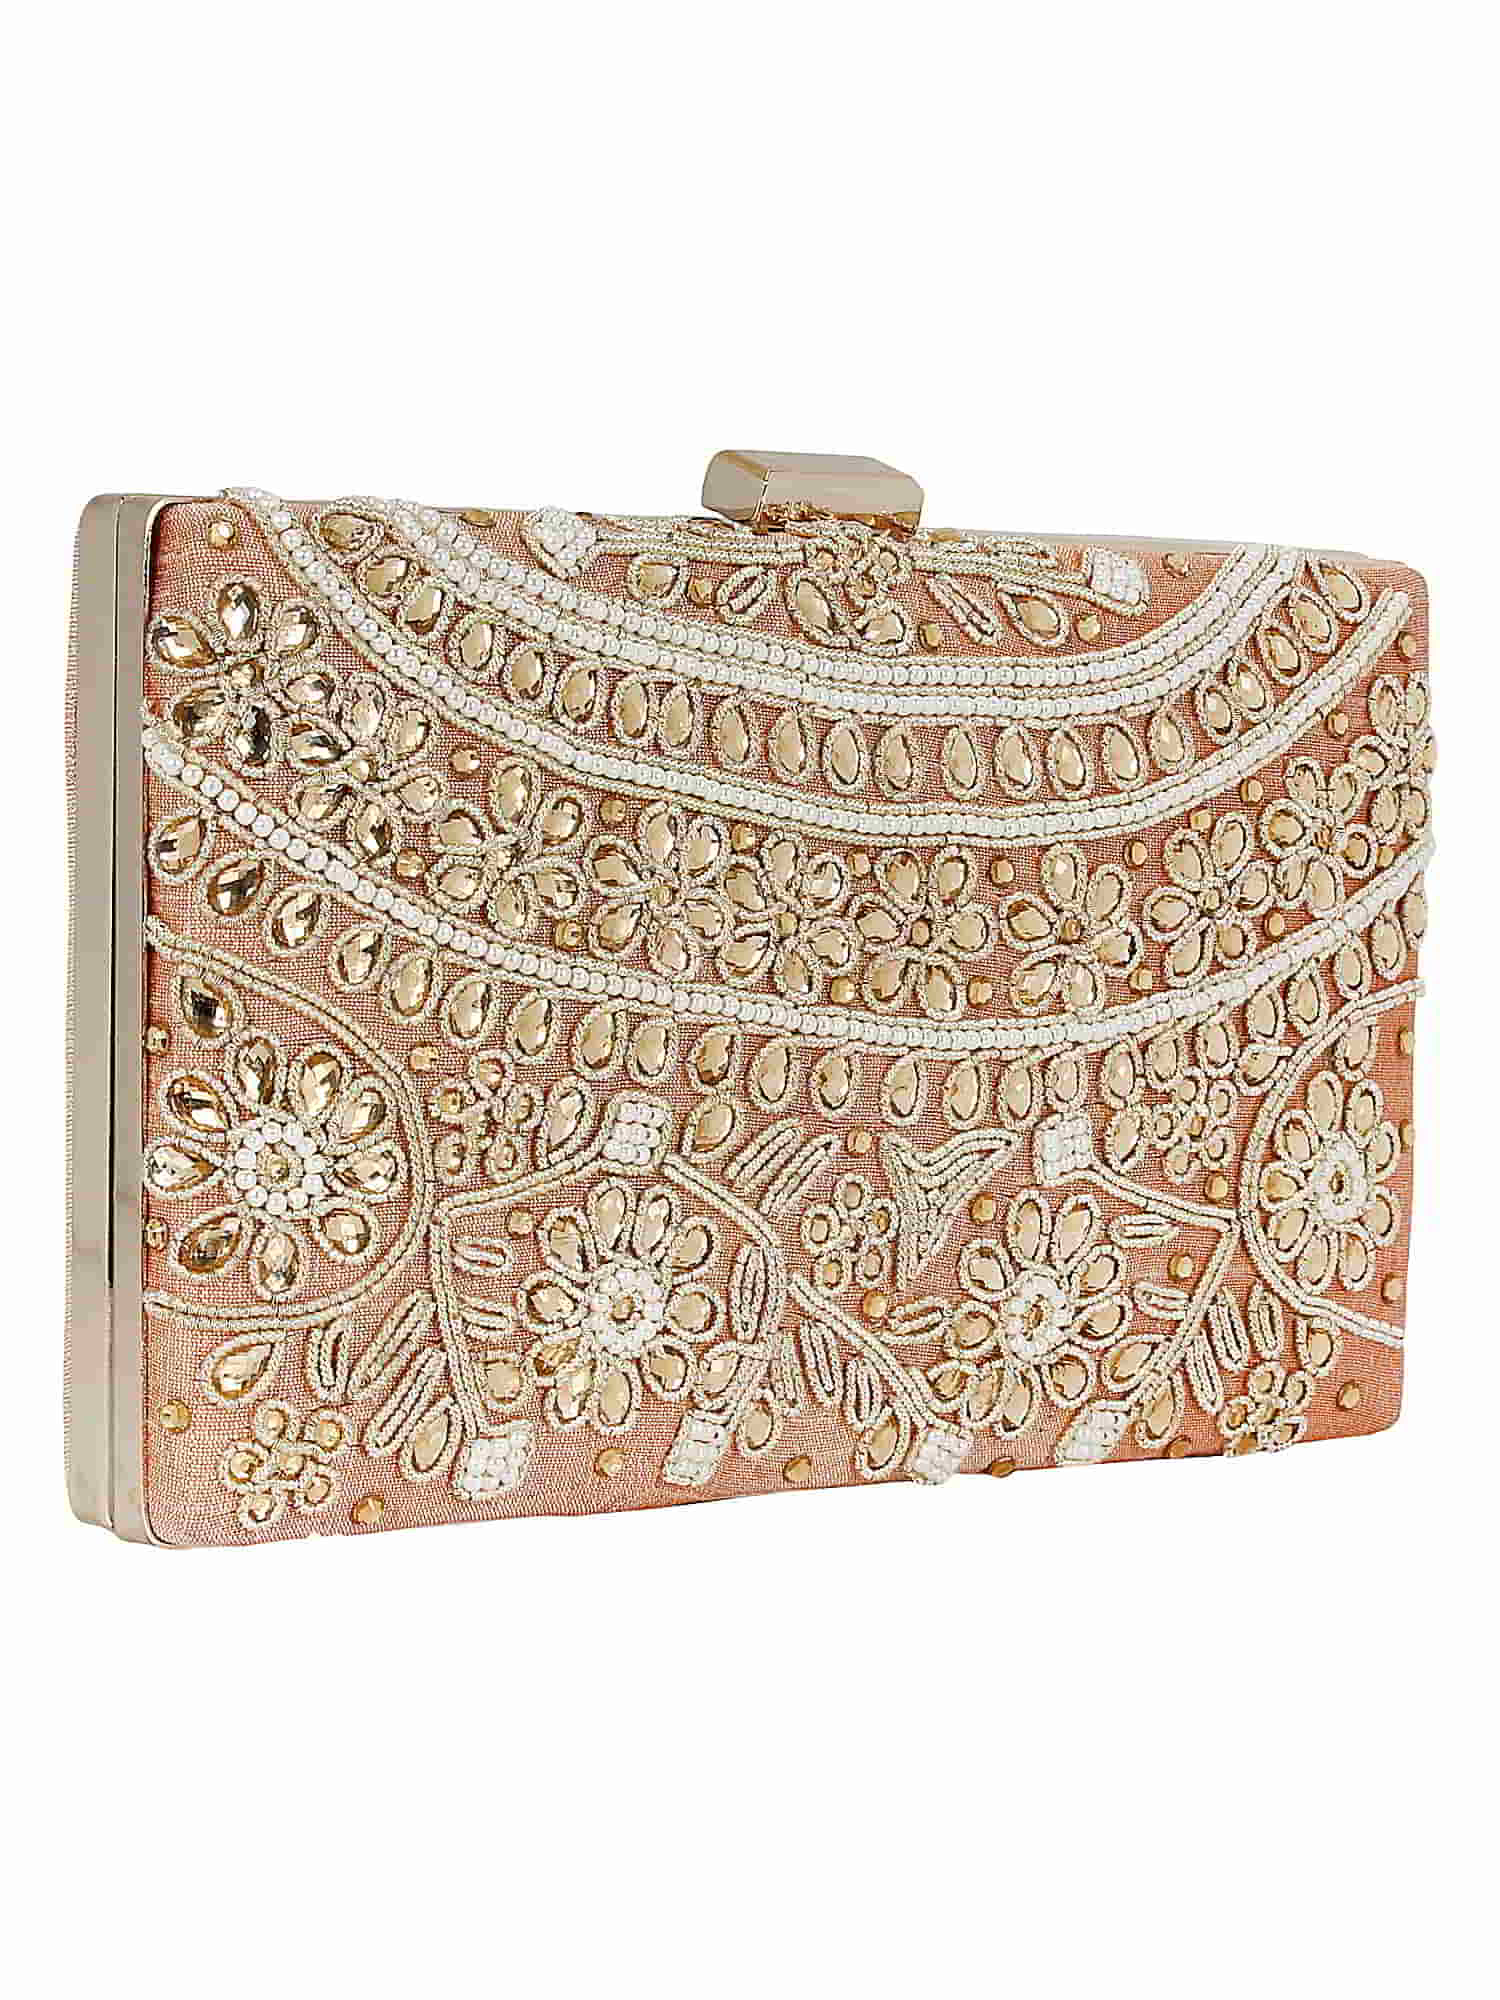 Ethnique Beaded and Embroidered Party Clutch